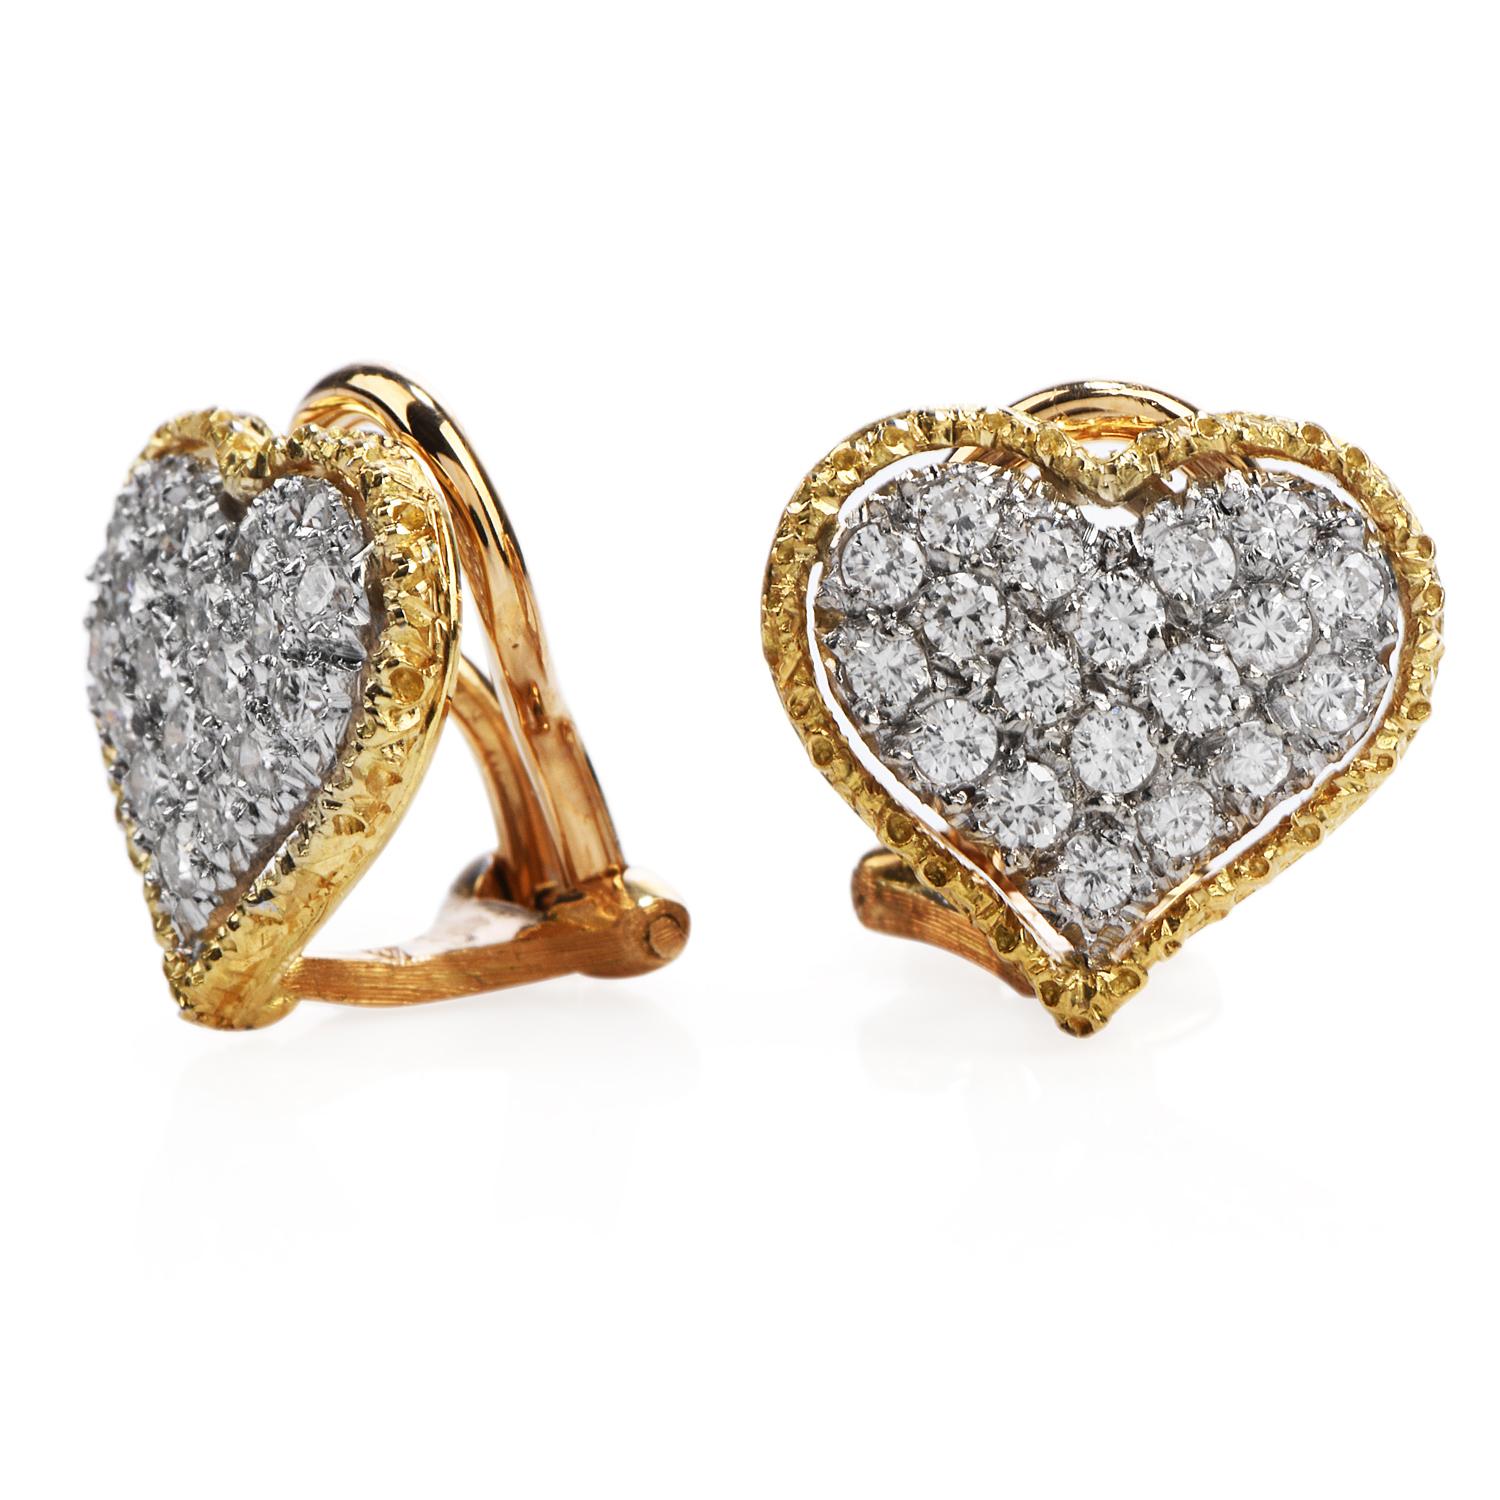 Buccellati Vintage Diamond 18 Karat Gold Heart Clip-On Earrings In Excellent Condition For Sale In Miami, FL